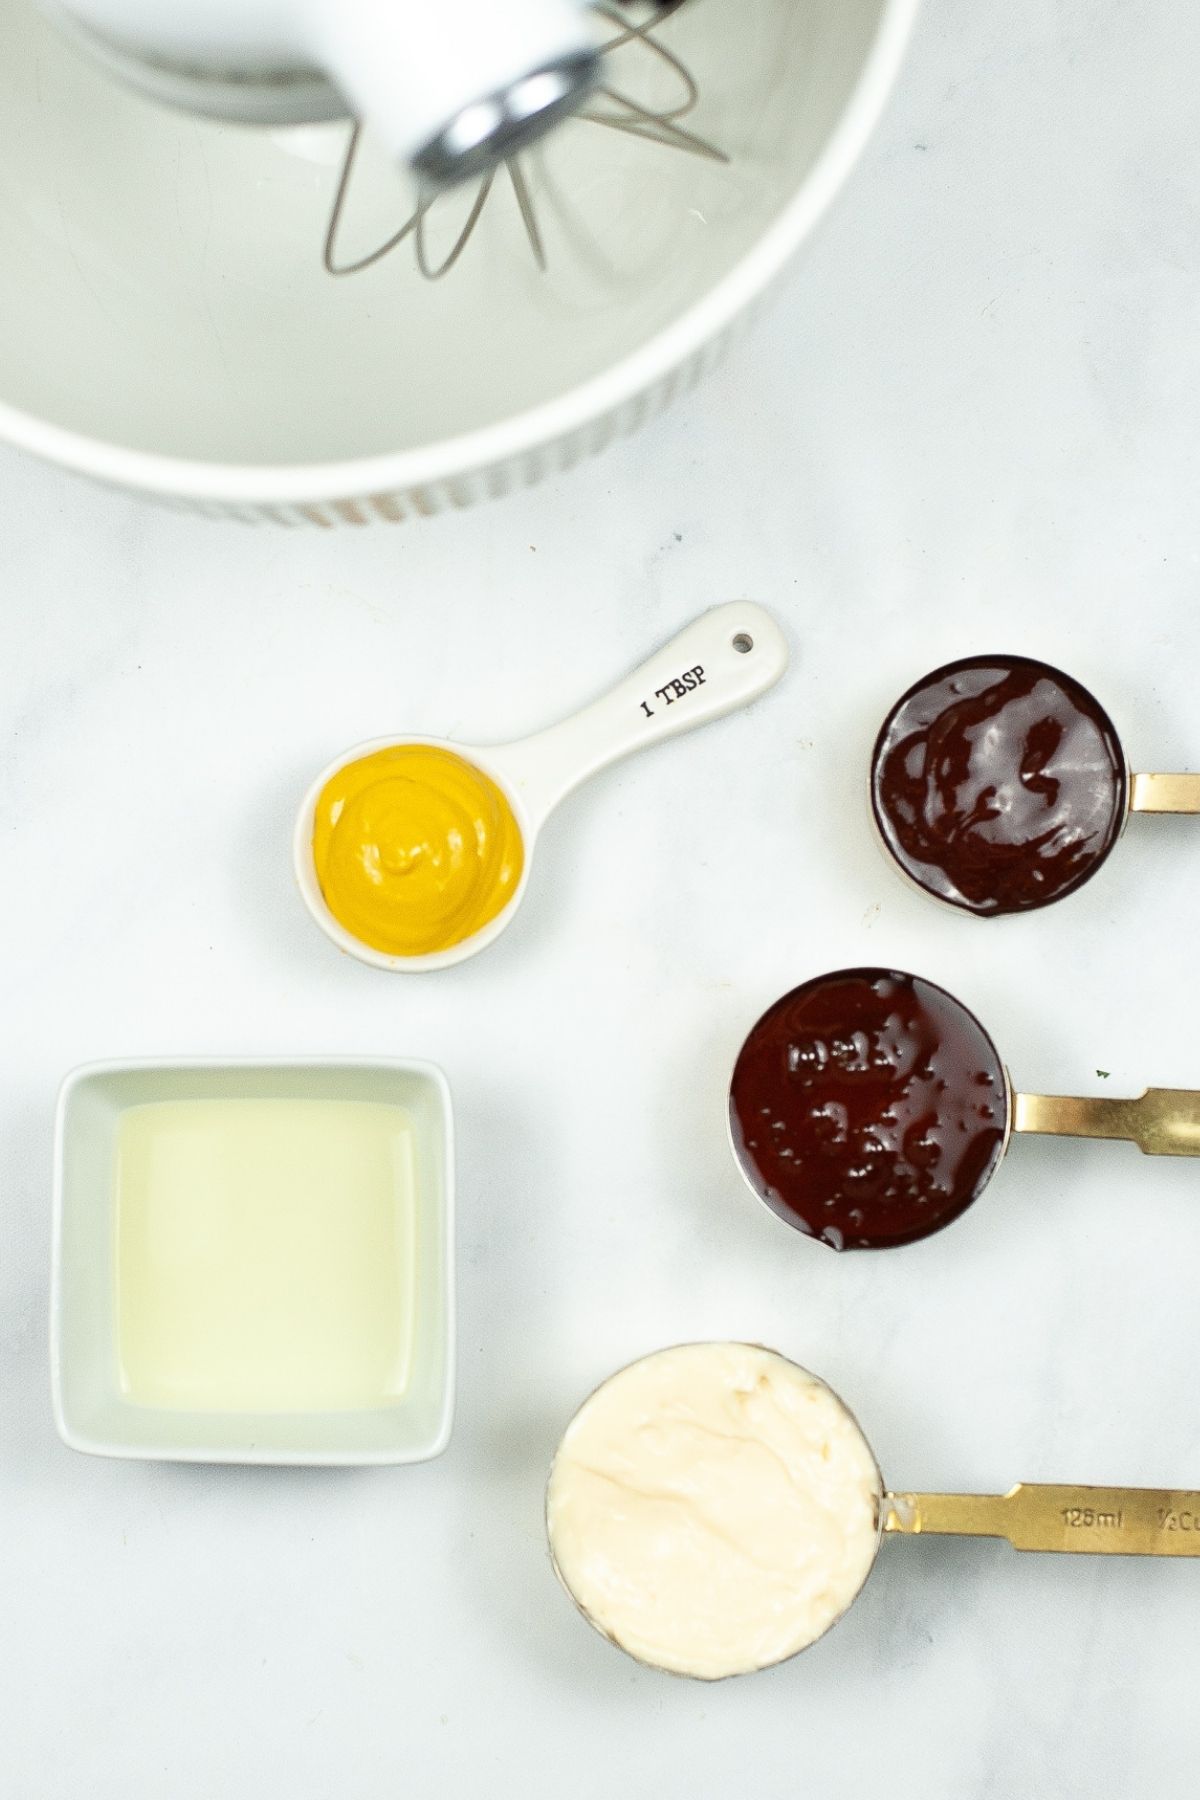 kitchen aid mixer with ingredients on counter: mustard, honey, BBQ sauce, mayonnaise